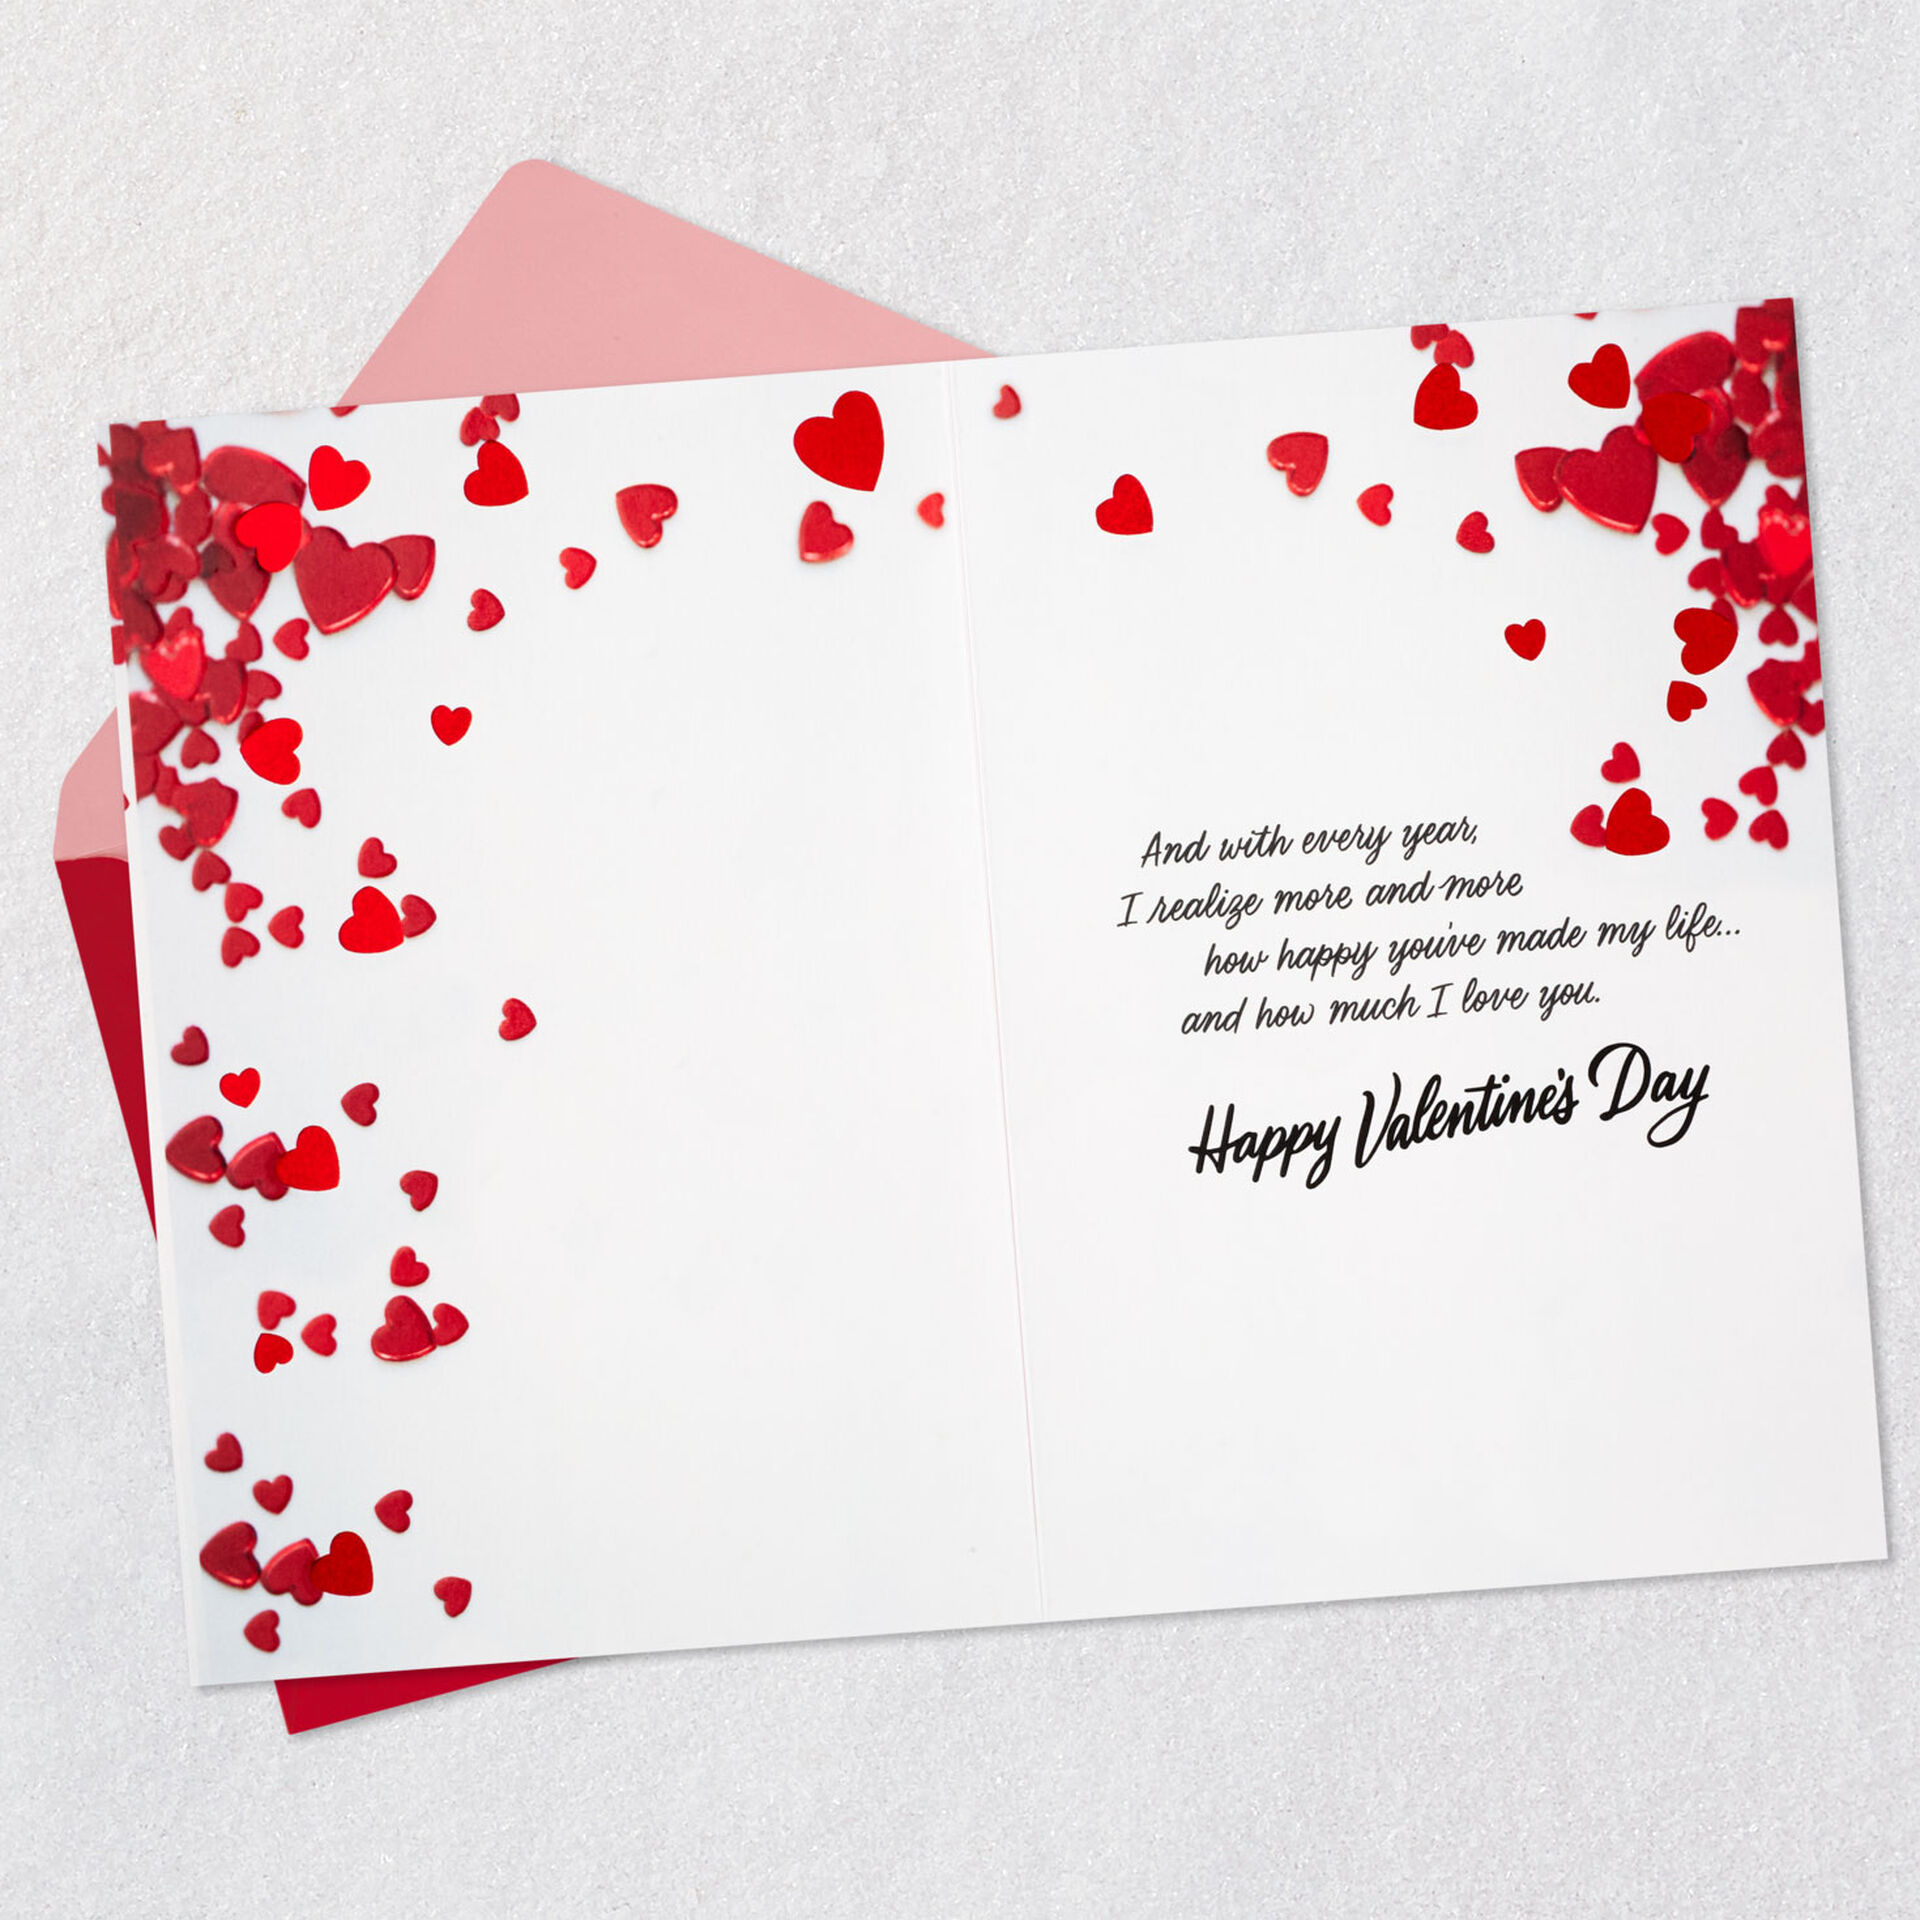 Love-You-Hearts-Daughter-Valentines-Day-Card_699VEE5285_03